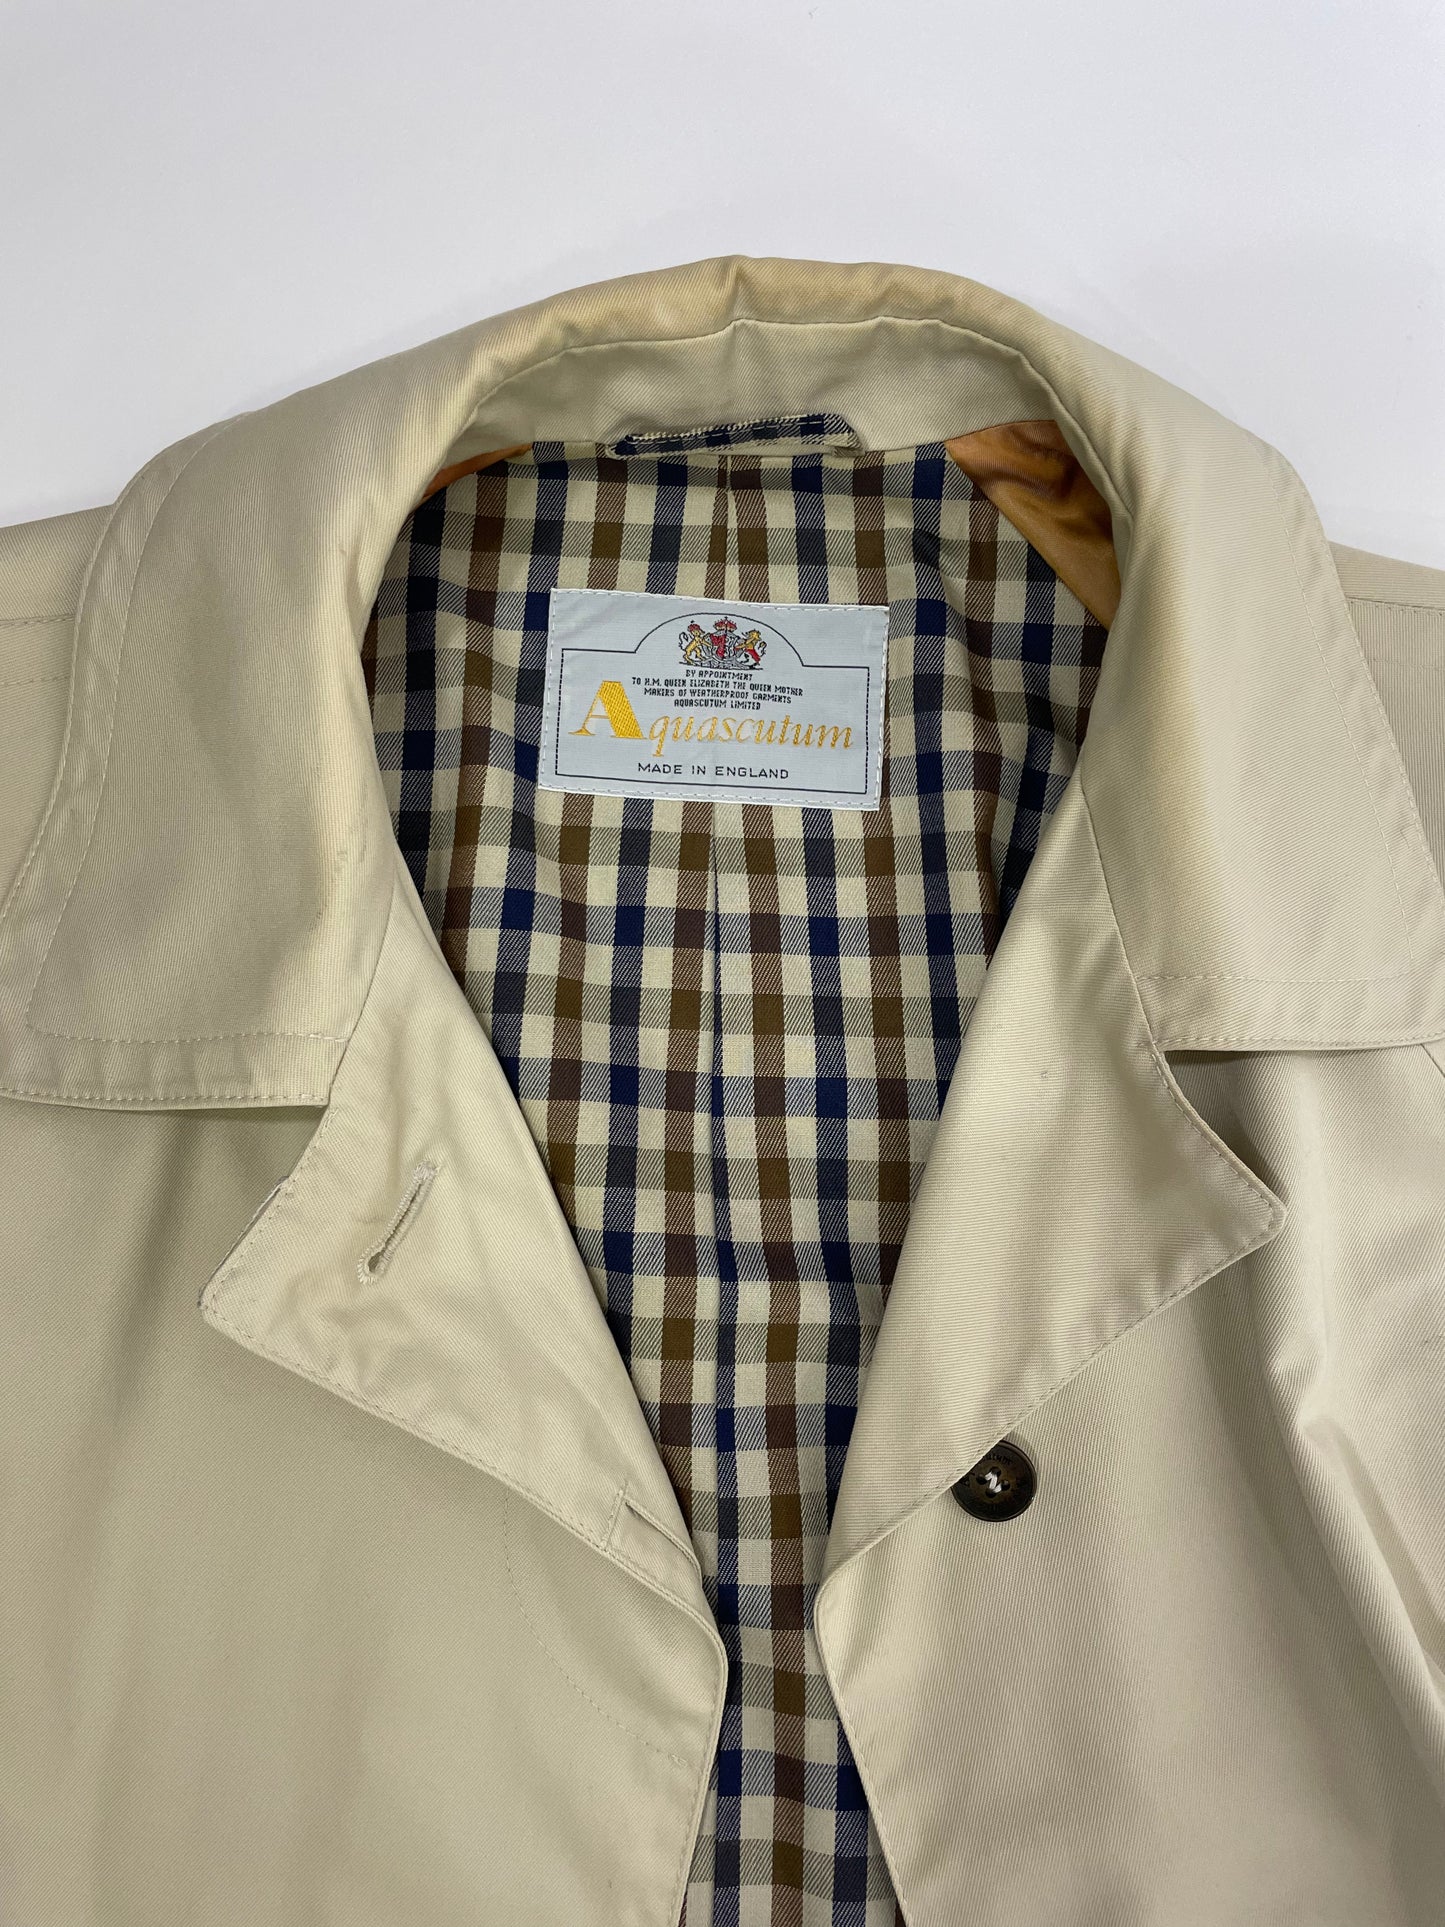 Trench Aquascutum Made in England